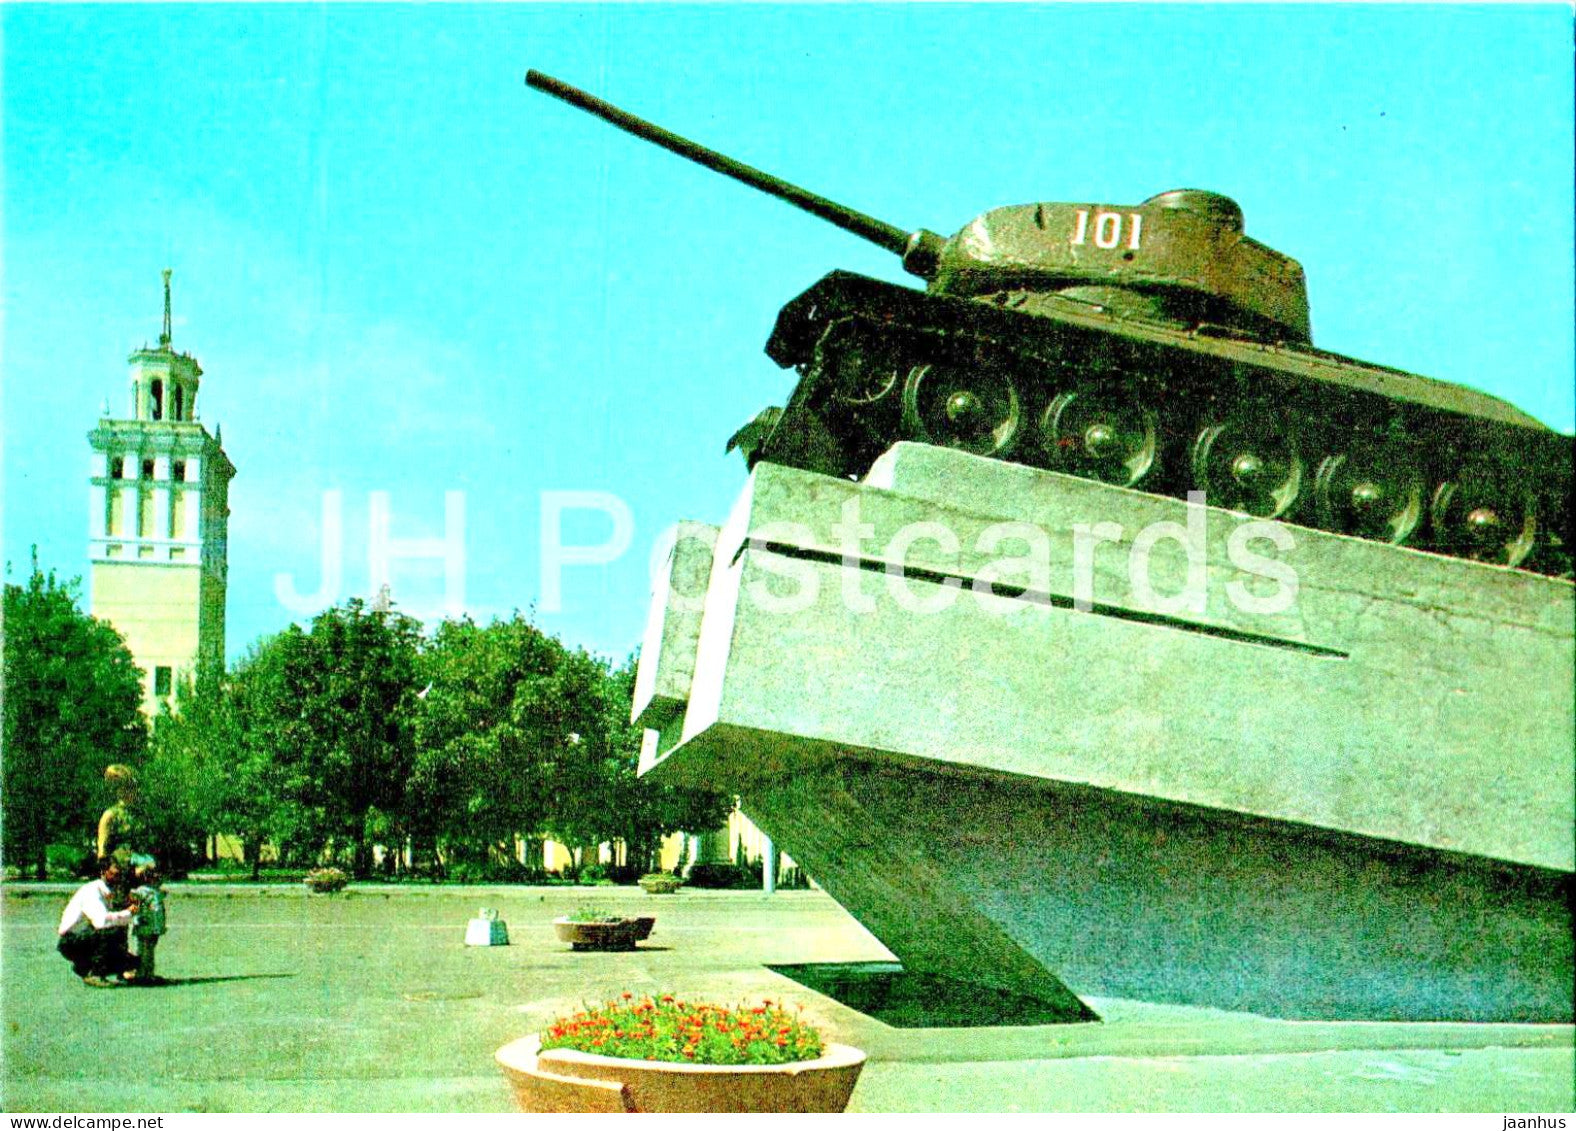 Gomel - monument in honour of those who liberated the city from the fascist - tank - 1976 - Belarus USSR - unused - JH Postcards